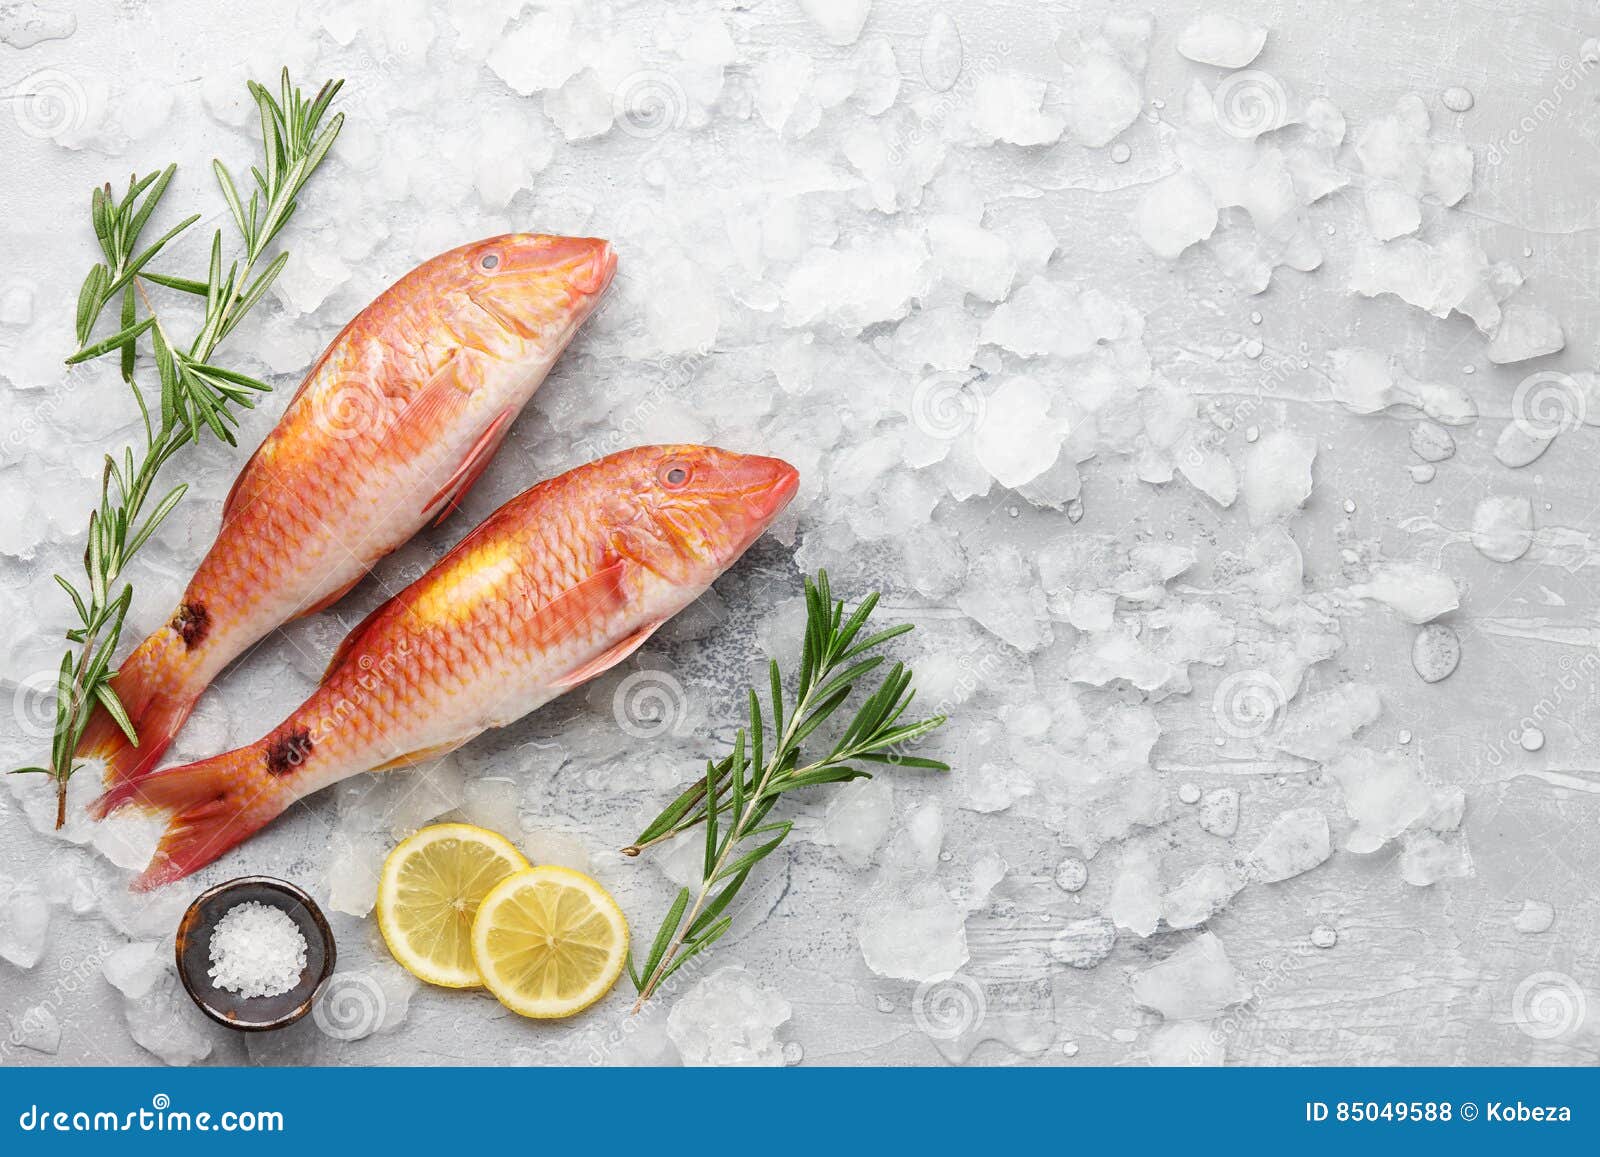 Red mullet fish cooking stock photo. Image of mullet